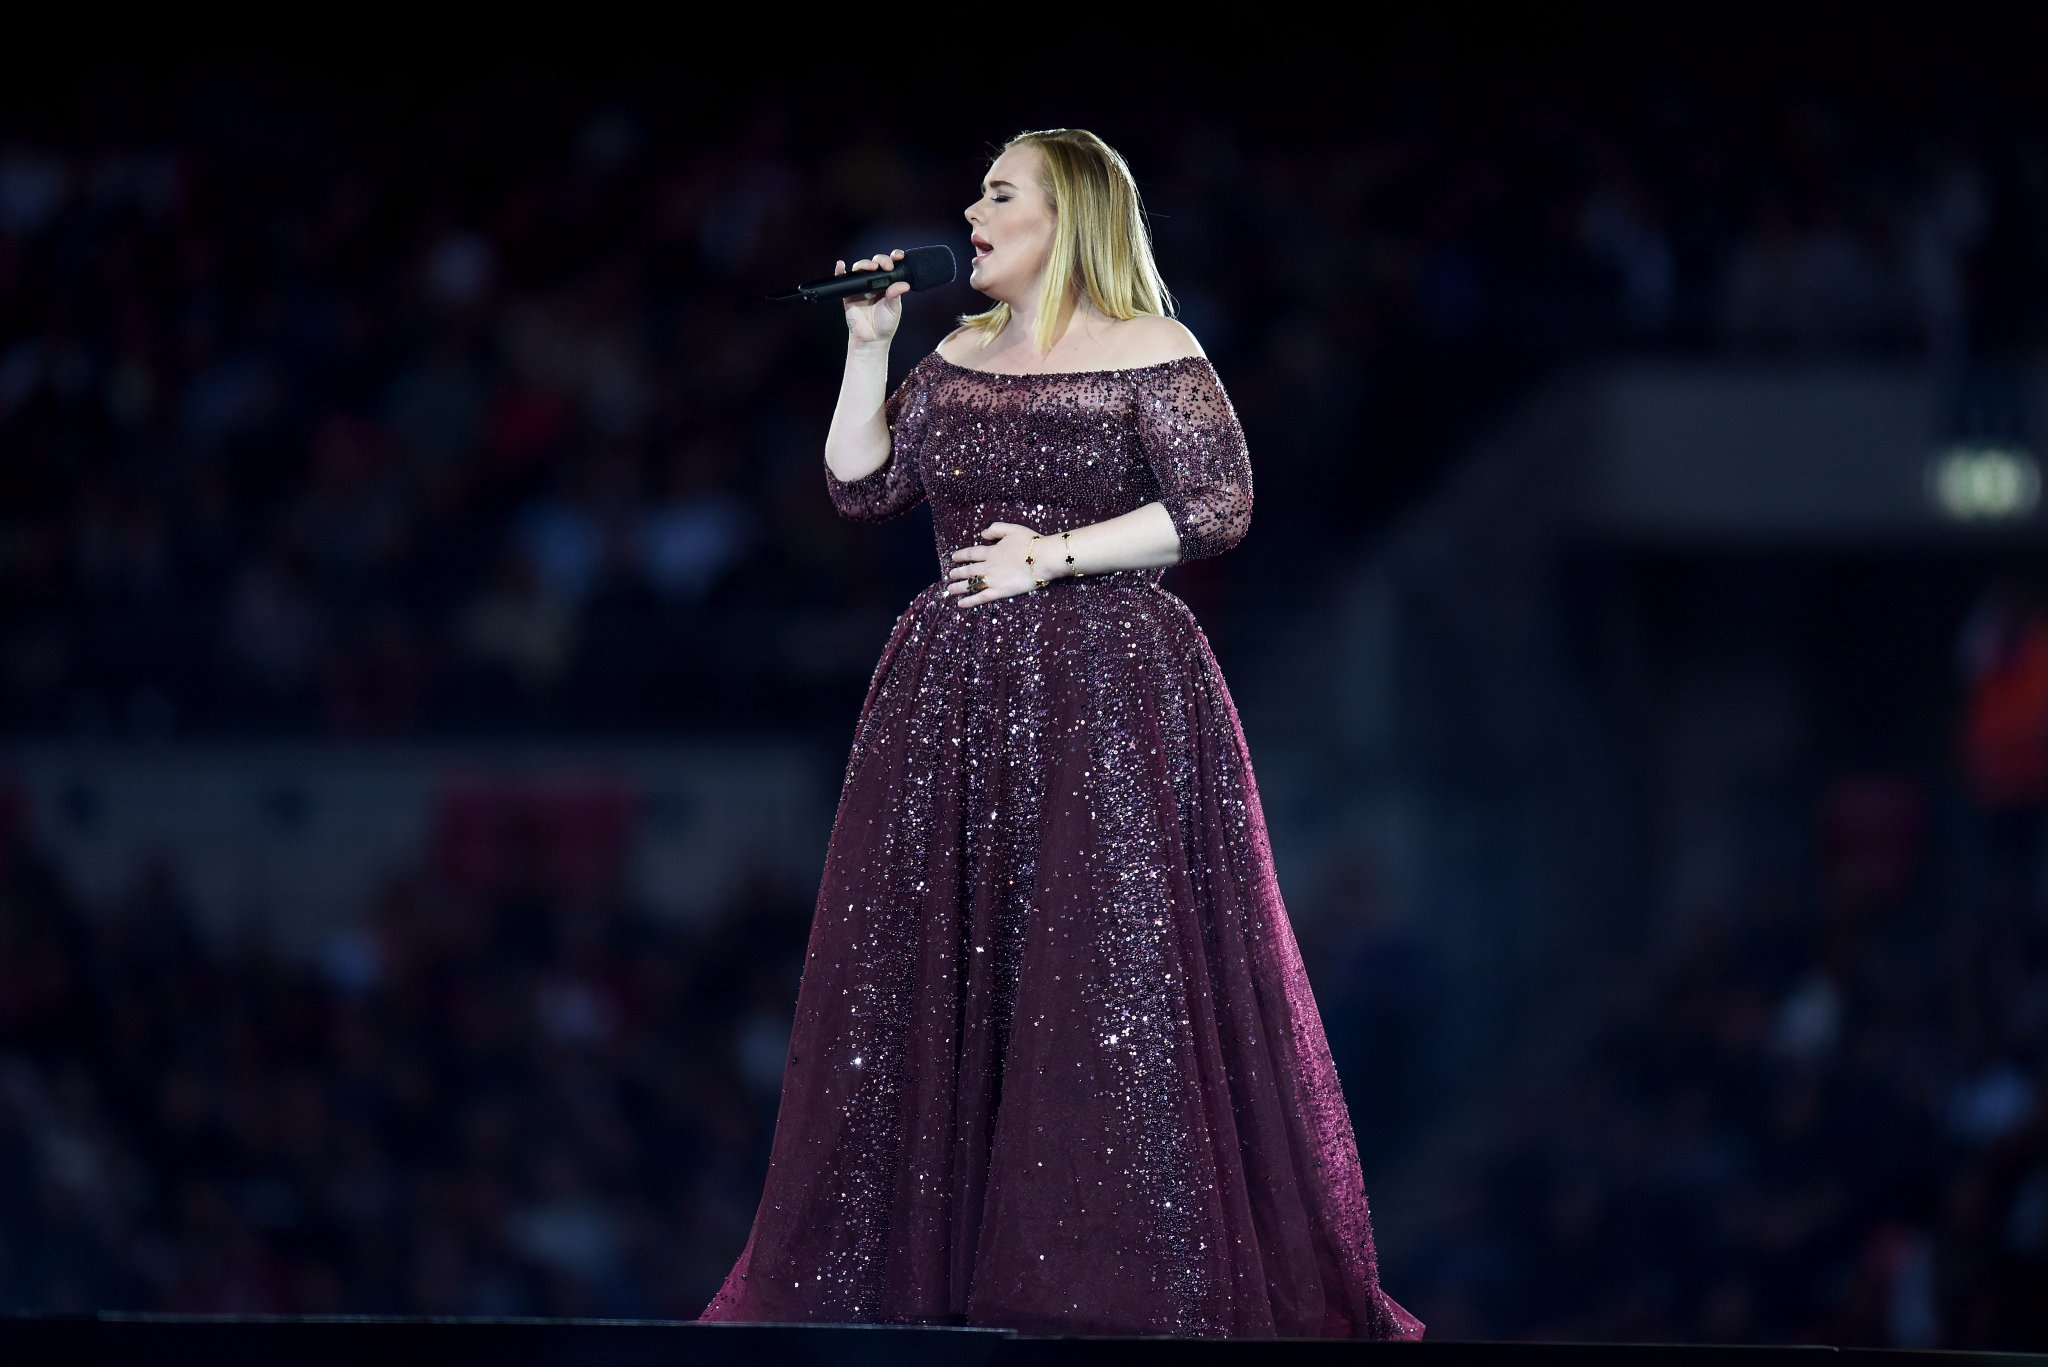 Adele sings for 98,000 fans at Wembley in what may be her first and